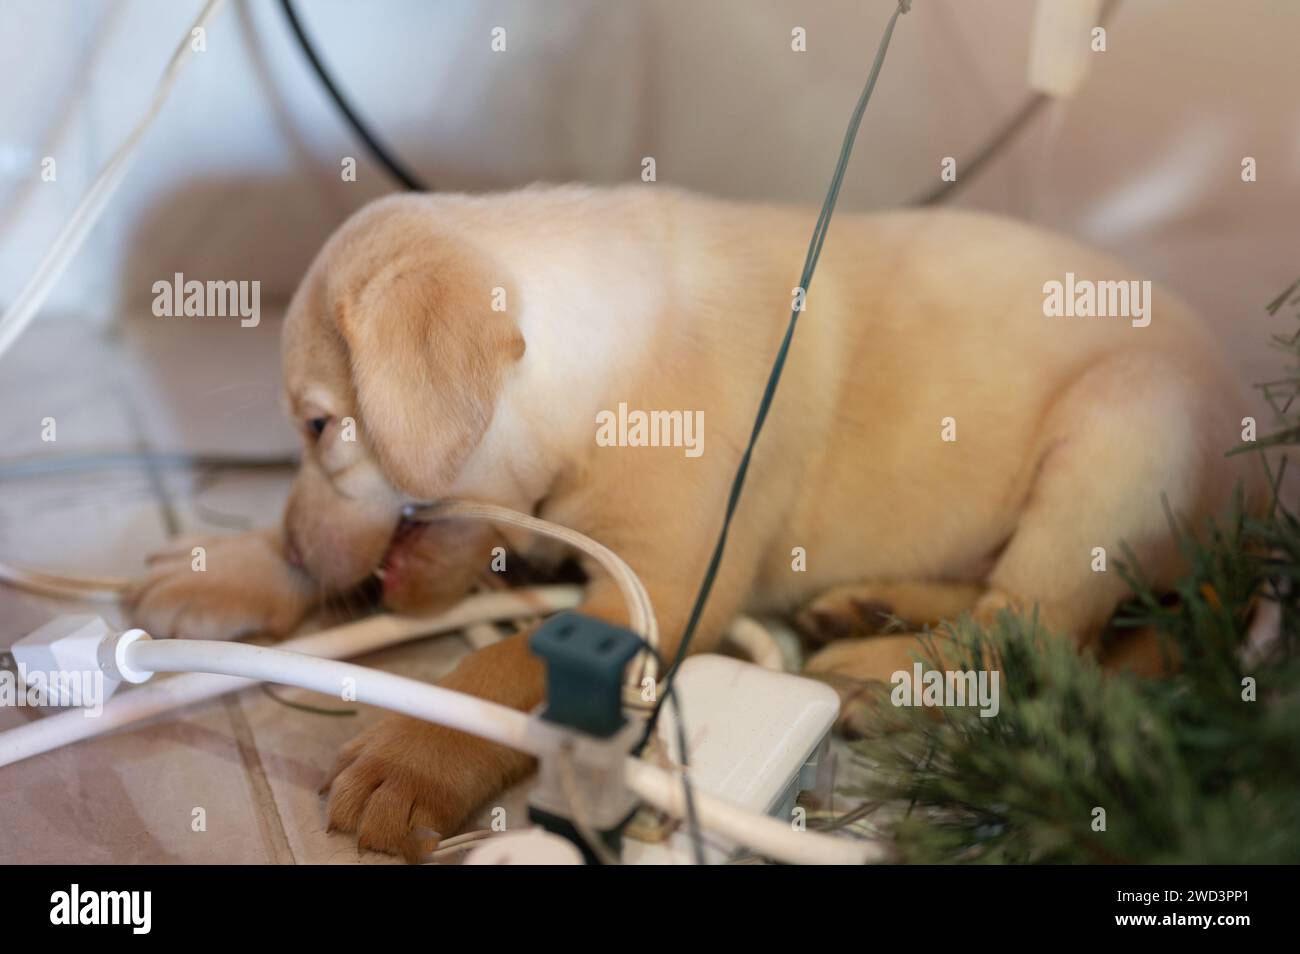 Naughty puppy biting electrical  cables in house close up view Stock Photo